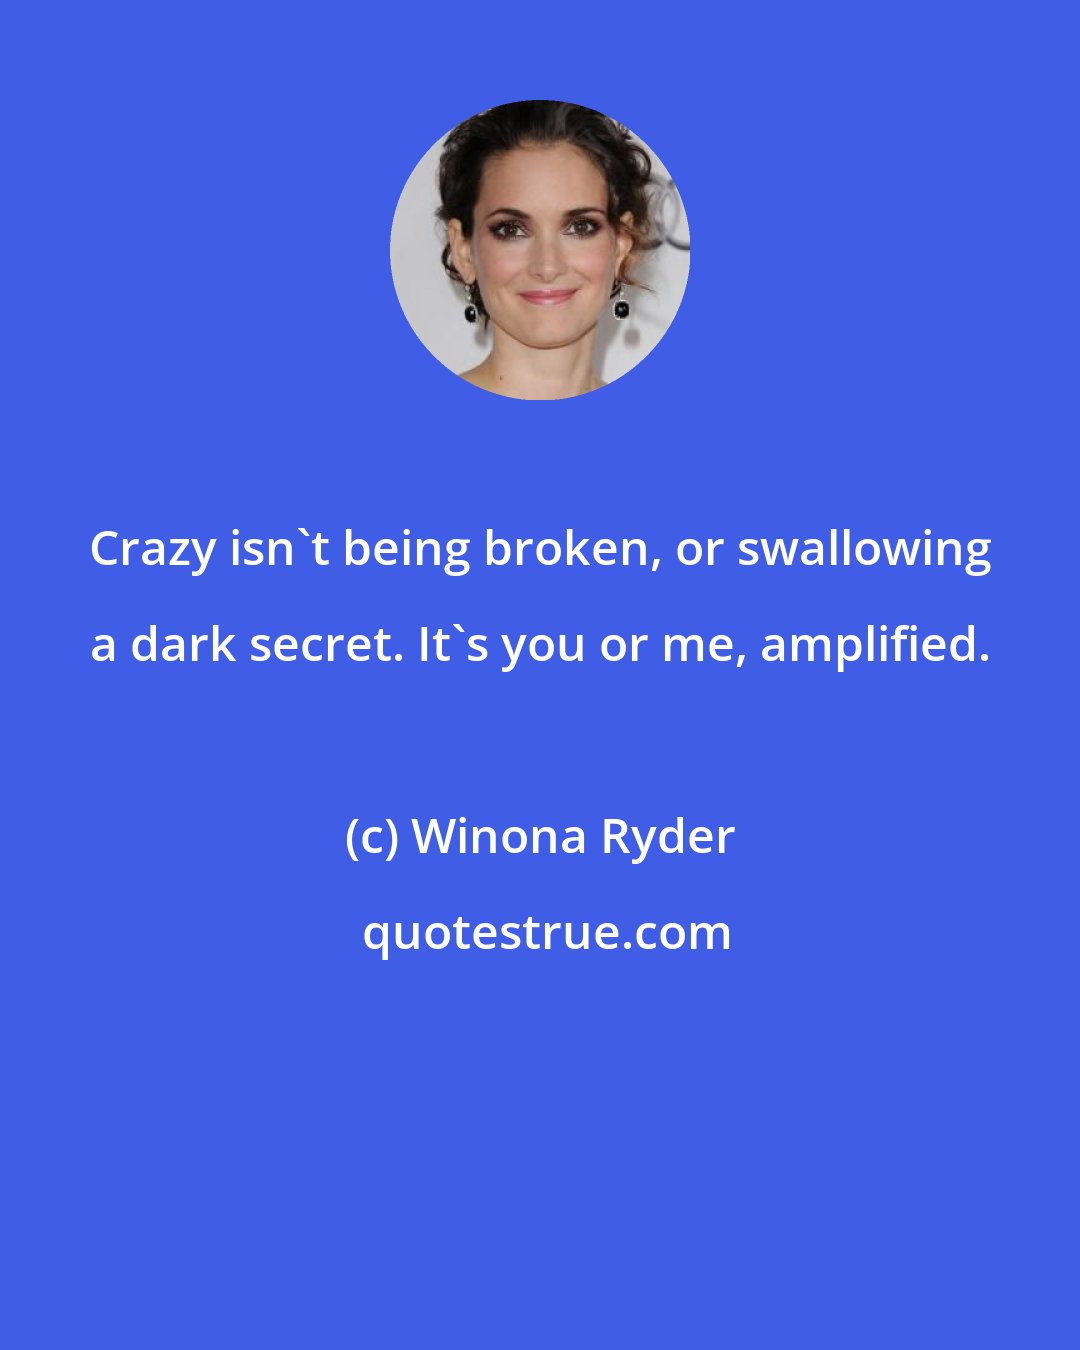 Winona Ryder: Crazy isn't being broken, or swallowing a dark secret. It's you or me, amplified.